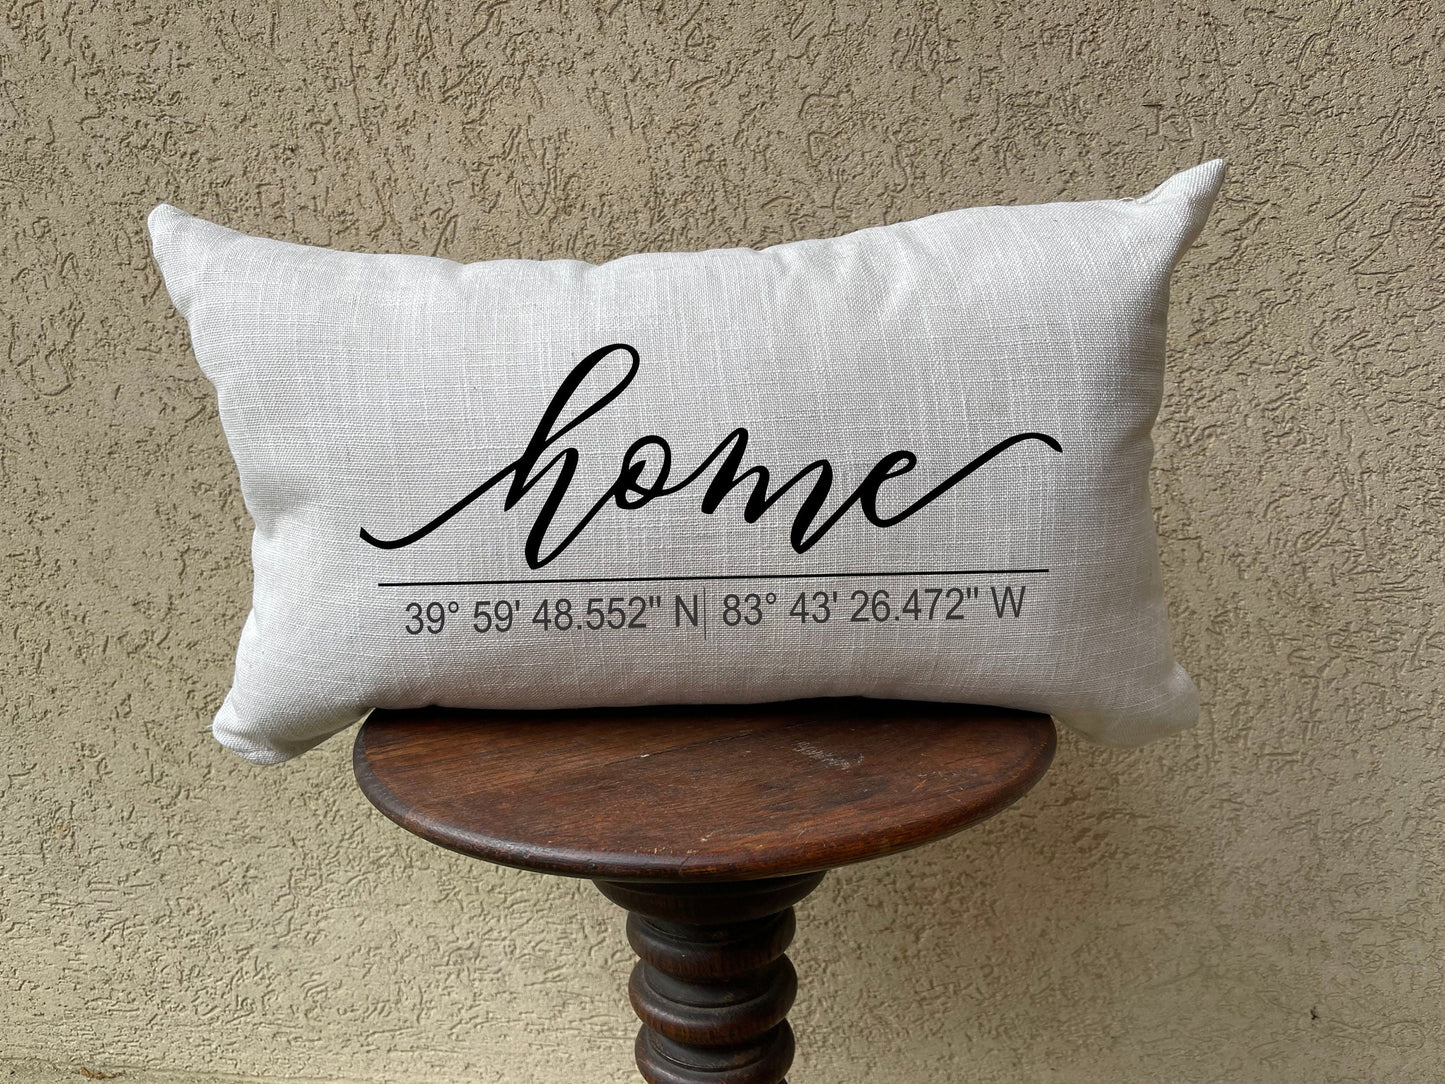 Nursey Word pillow, pillow with your lettering, nursery pillow, personalized pillow, farmhouse style pillow, pillow with words